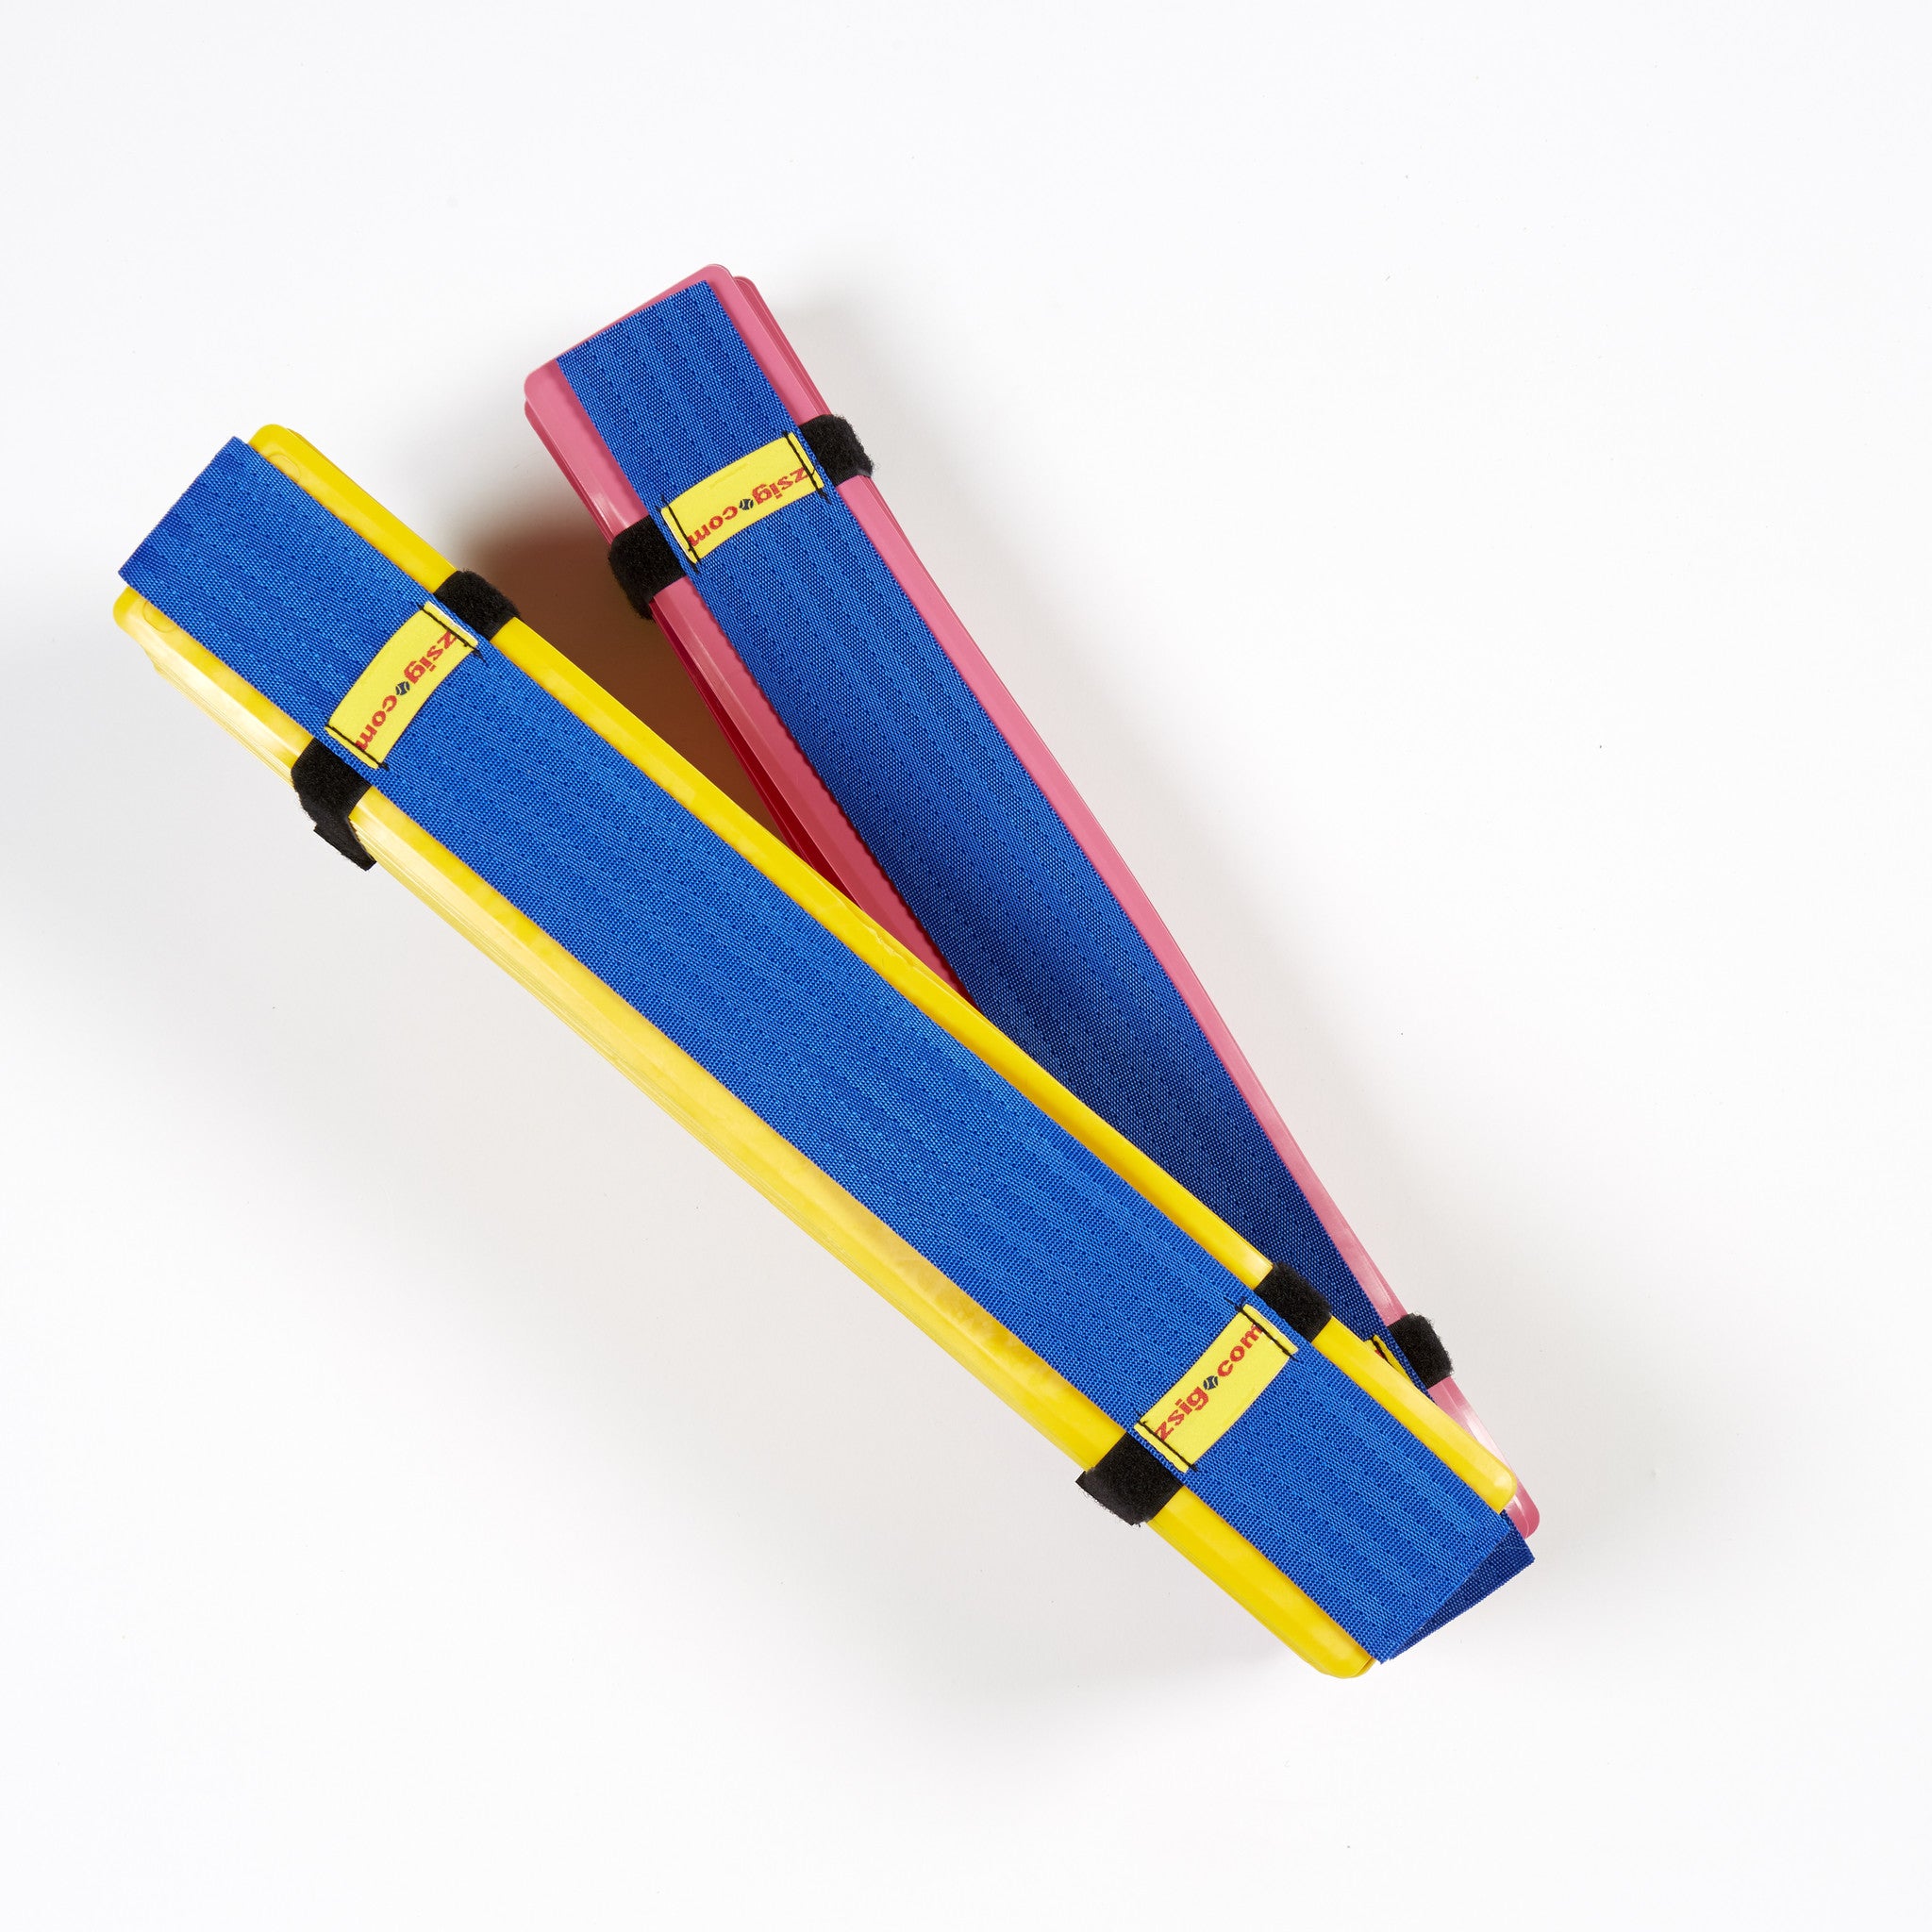 Pink & yellow sets of Throw down lines packed in their easy-to-carry harnesses.